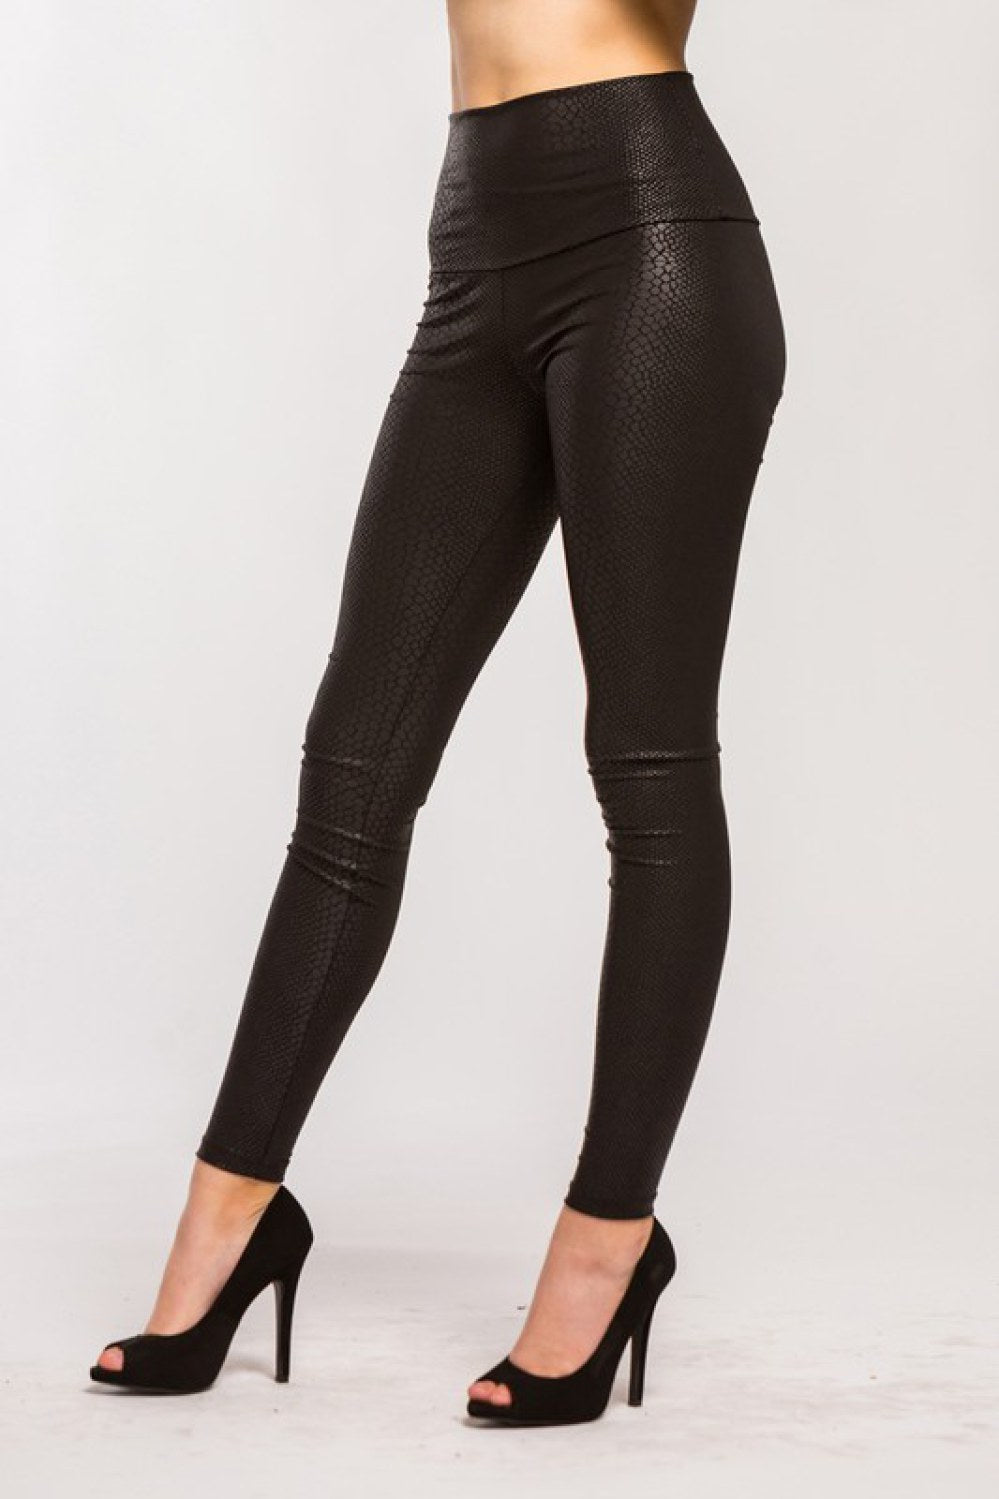 Snake Skin Embossed PU Vegan Faux Leather Black Leggings | Brand: Cherish | Proudly Made in the USA | Classy Cozy Cool Women's Clothing Boutique